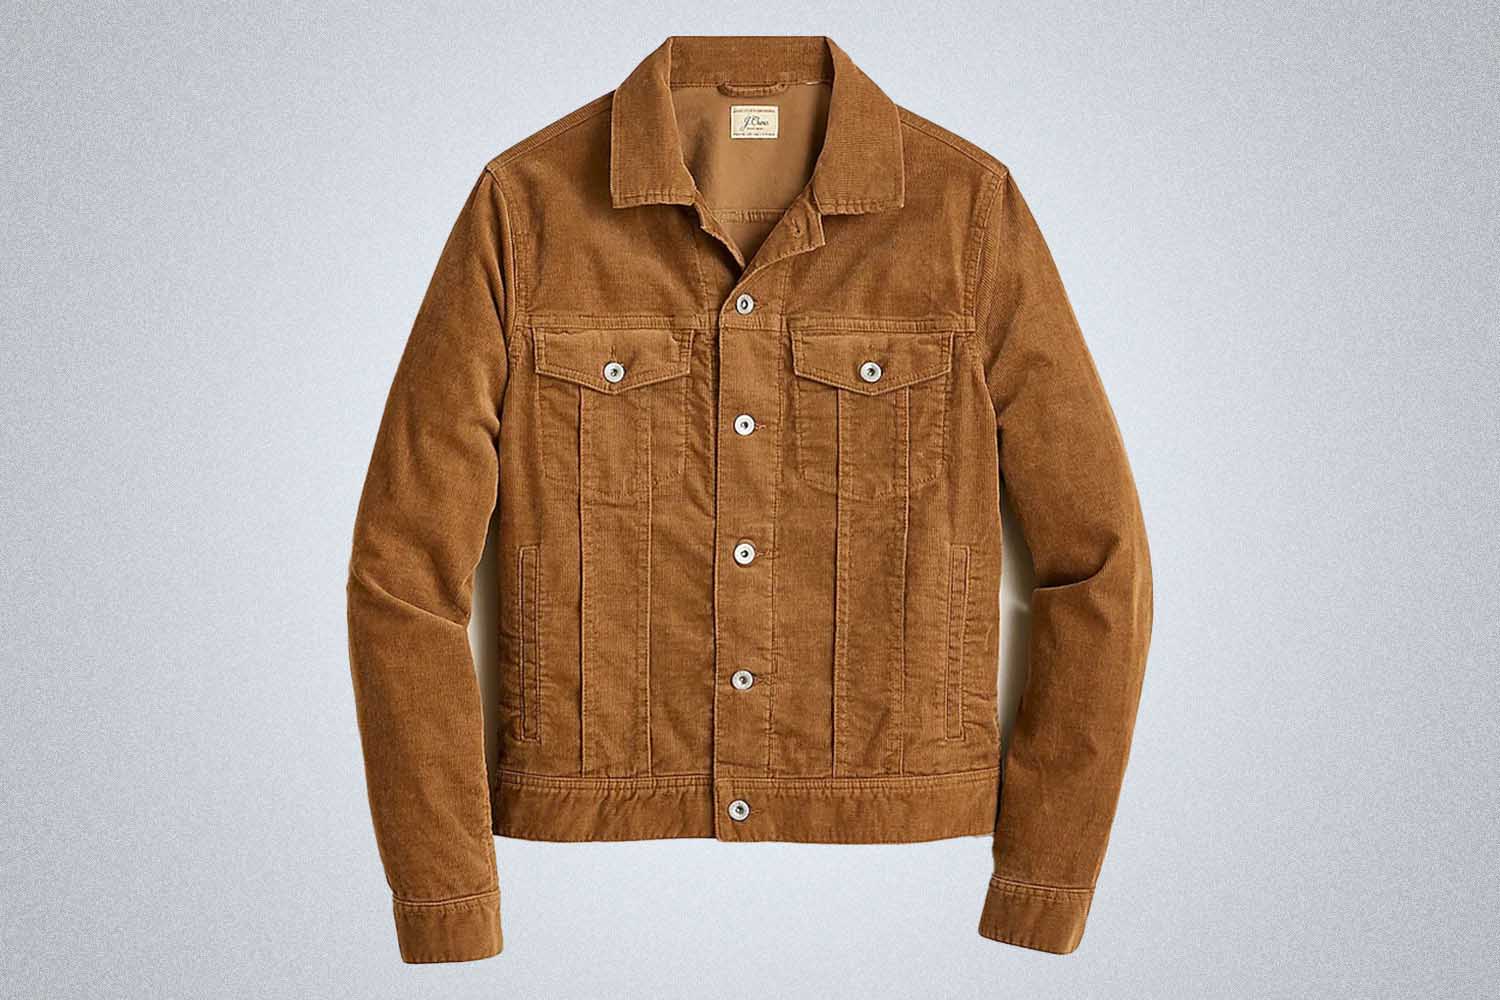 a brow corduroy jacket from J.crew on a grey background